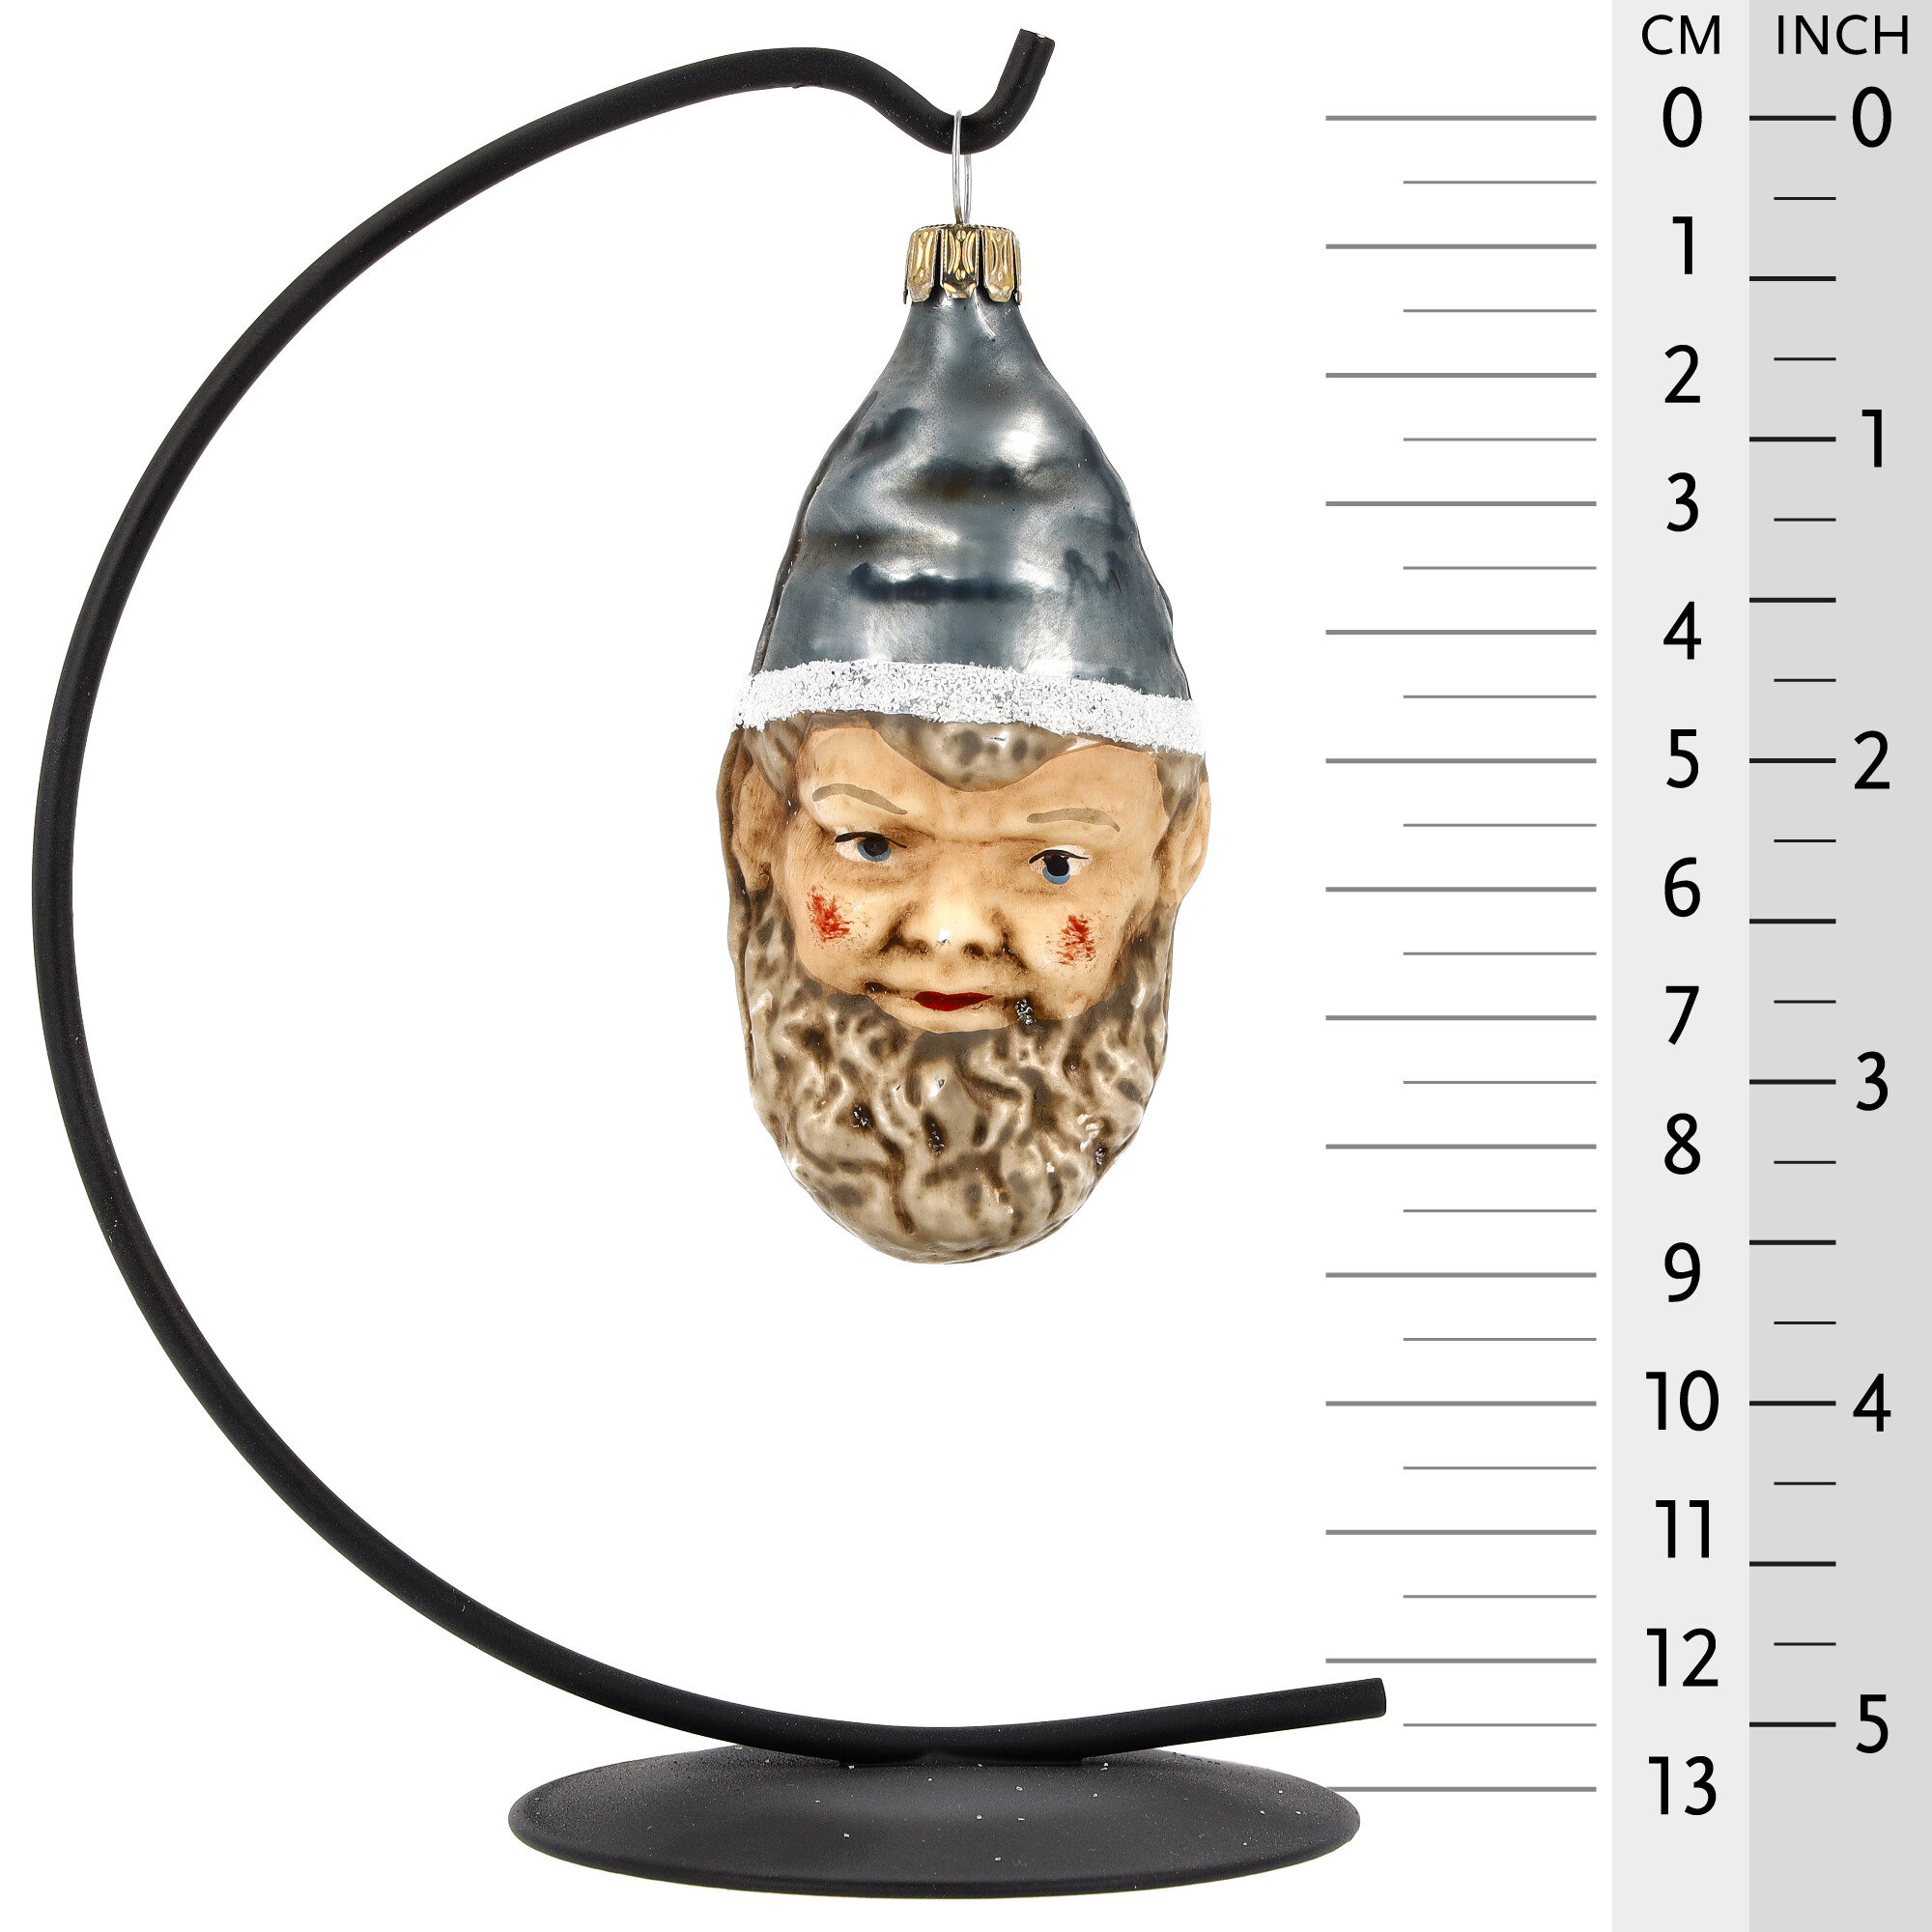 Retro Vintage style Christmas Glass Ornament - Dwarf with blue hat